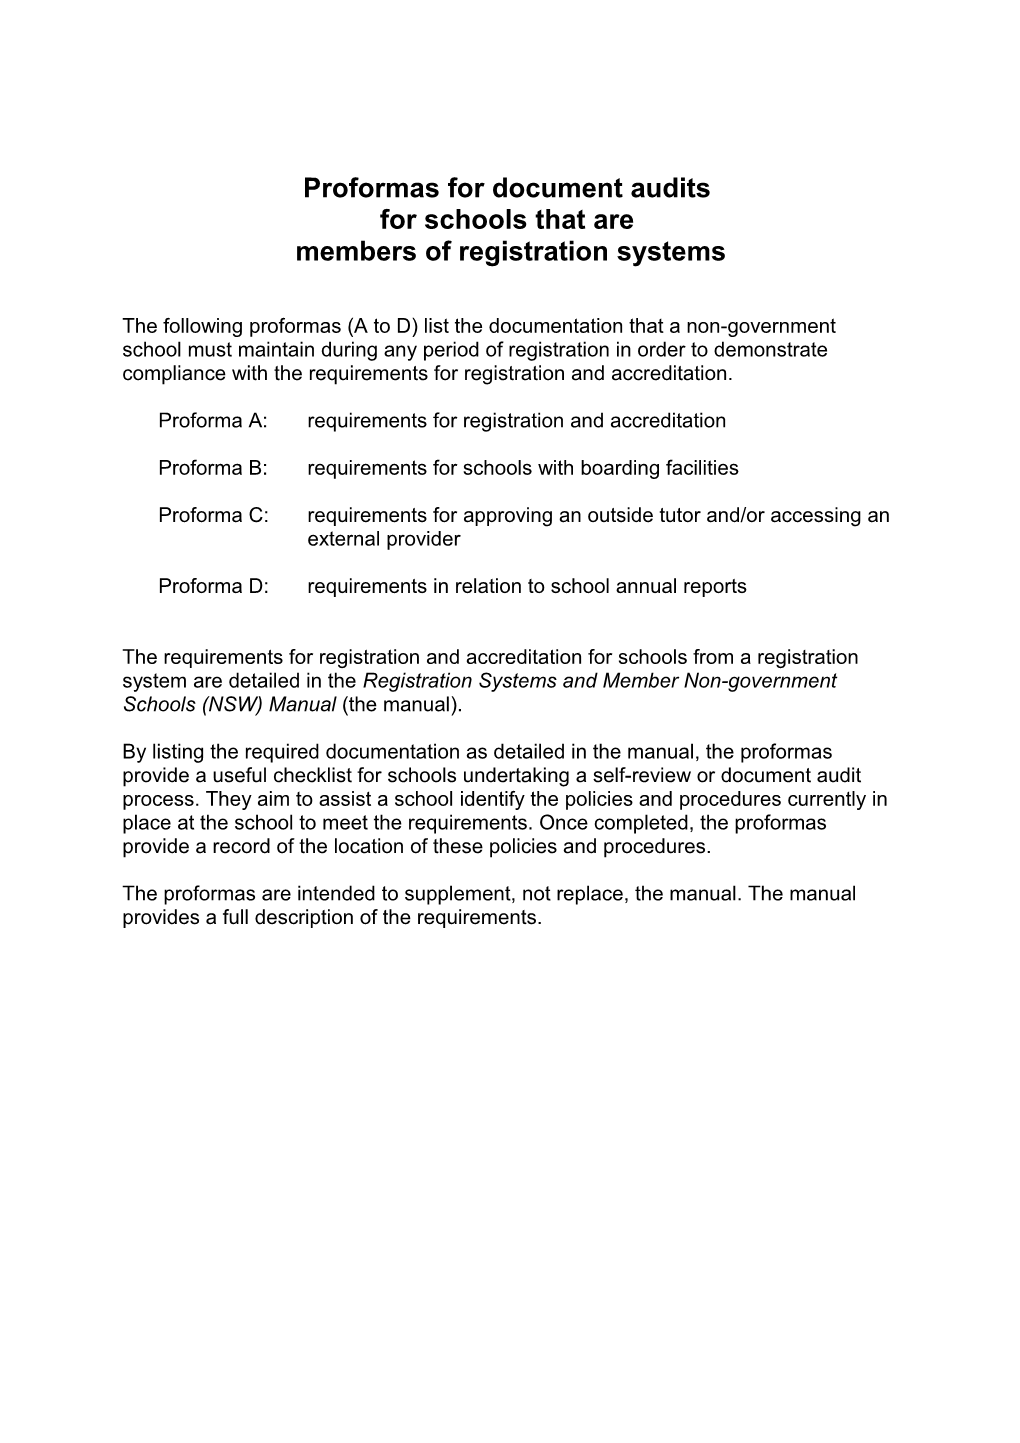 Proformas for Document Audits for Schools That Are Members of Registration Systems